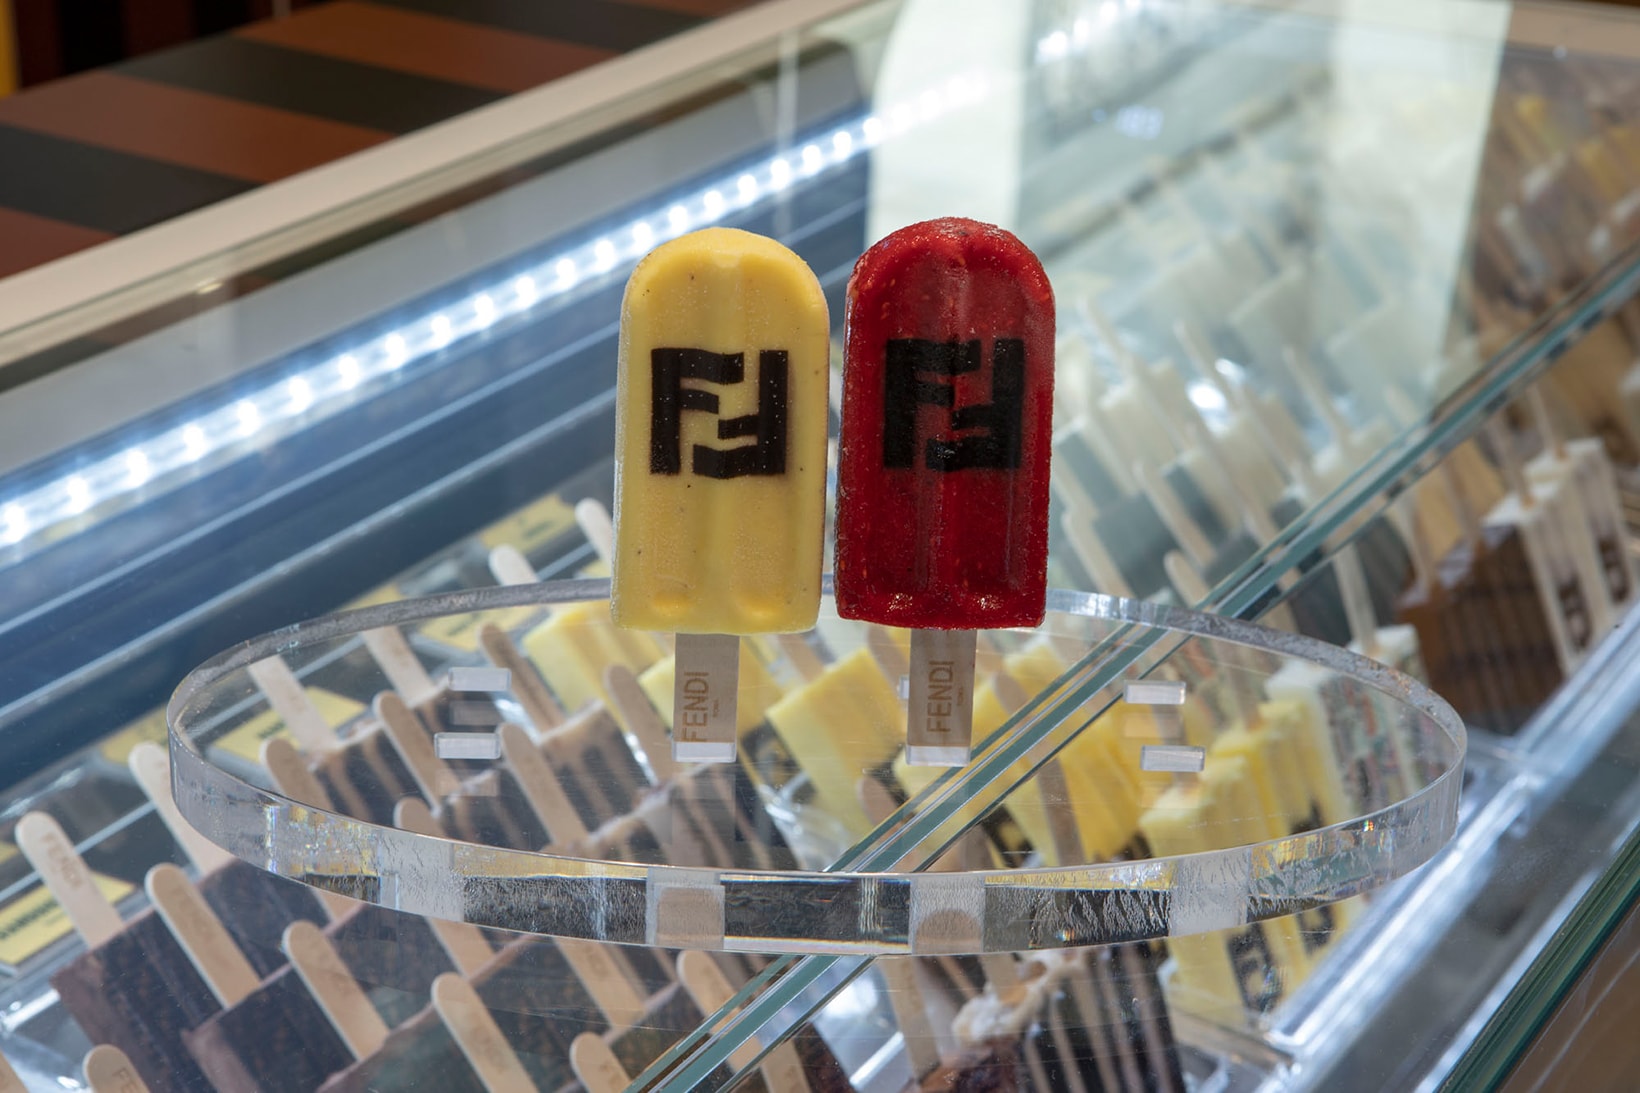 fendi steccolecco collaboration ice cream pop up milan central station dessert food sweets